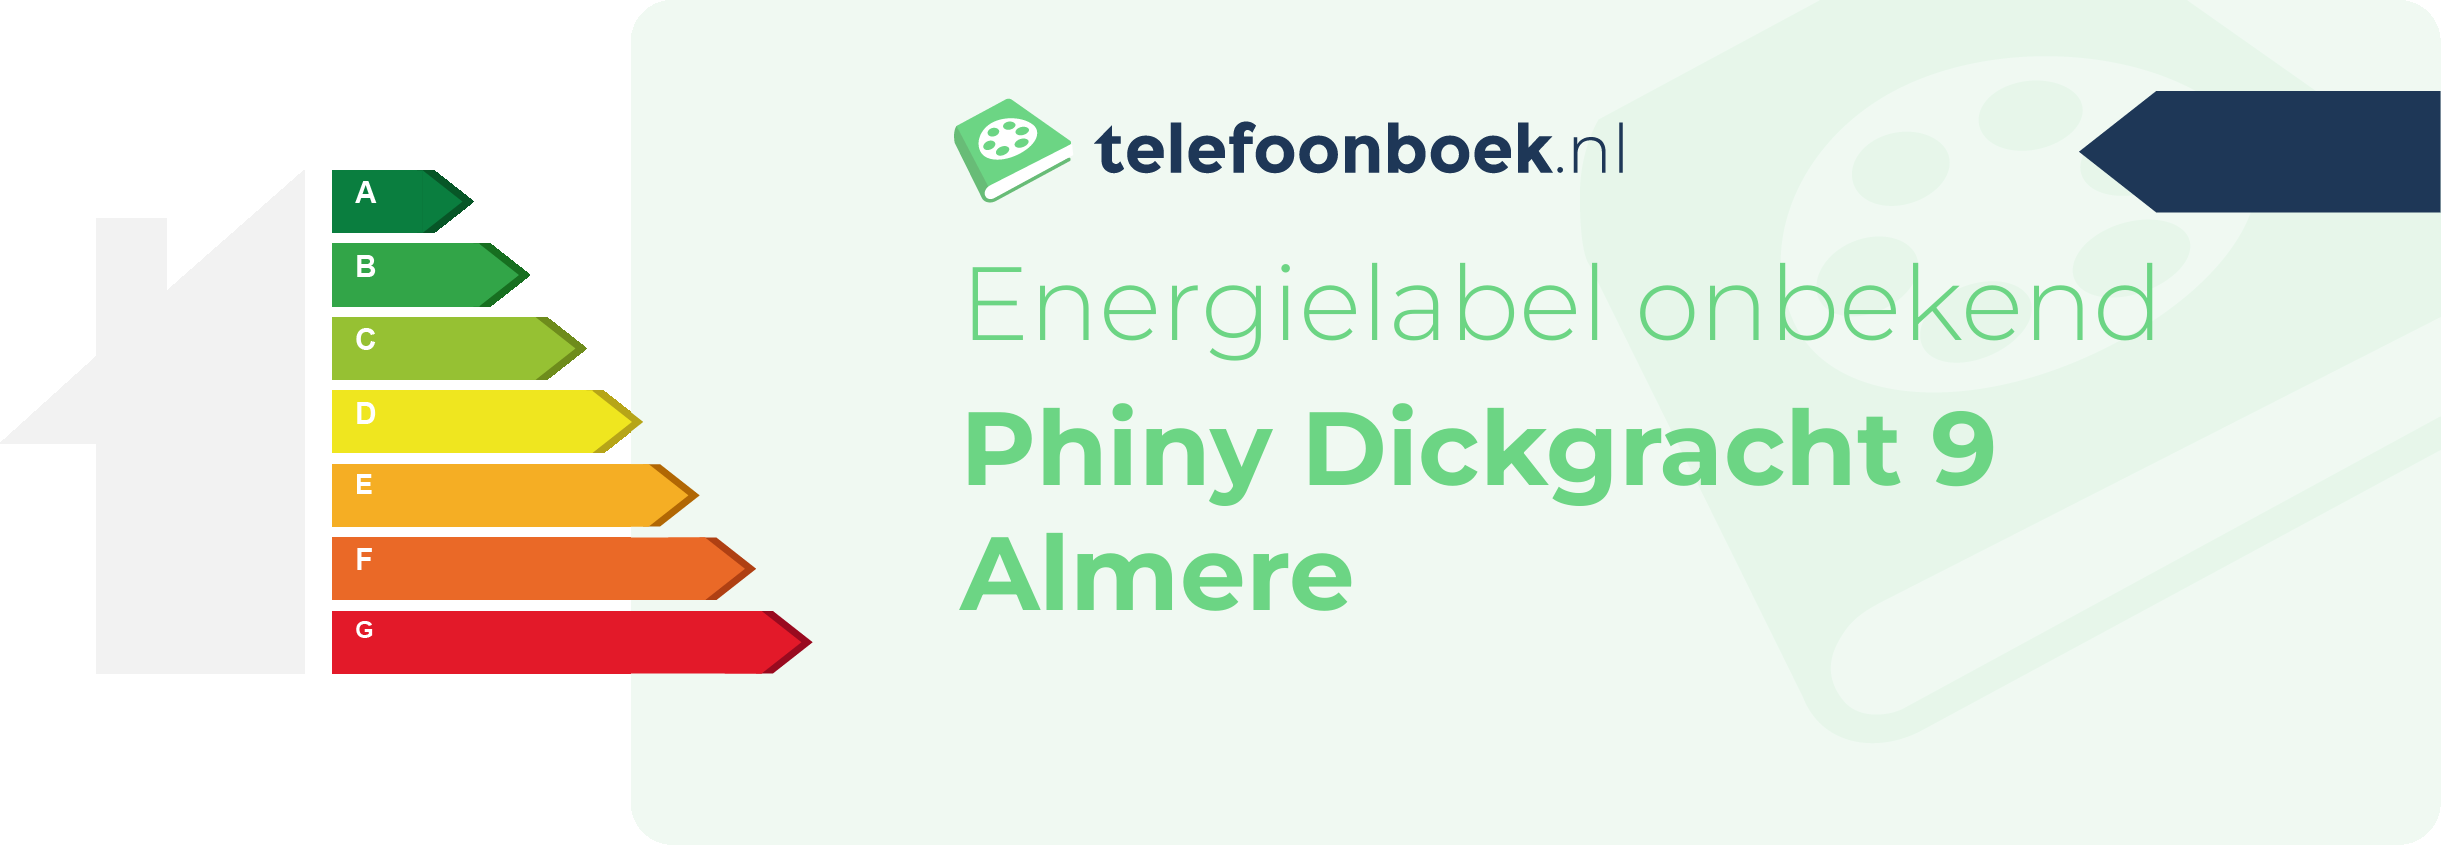 Energielabel Phiny Dickgracht 9 Almere